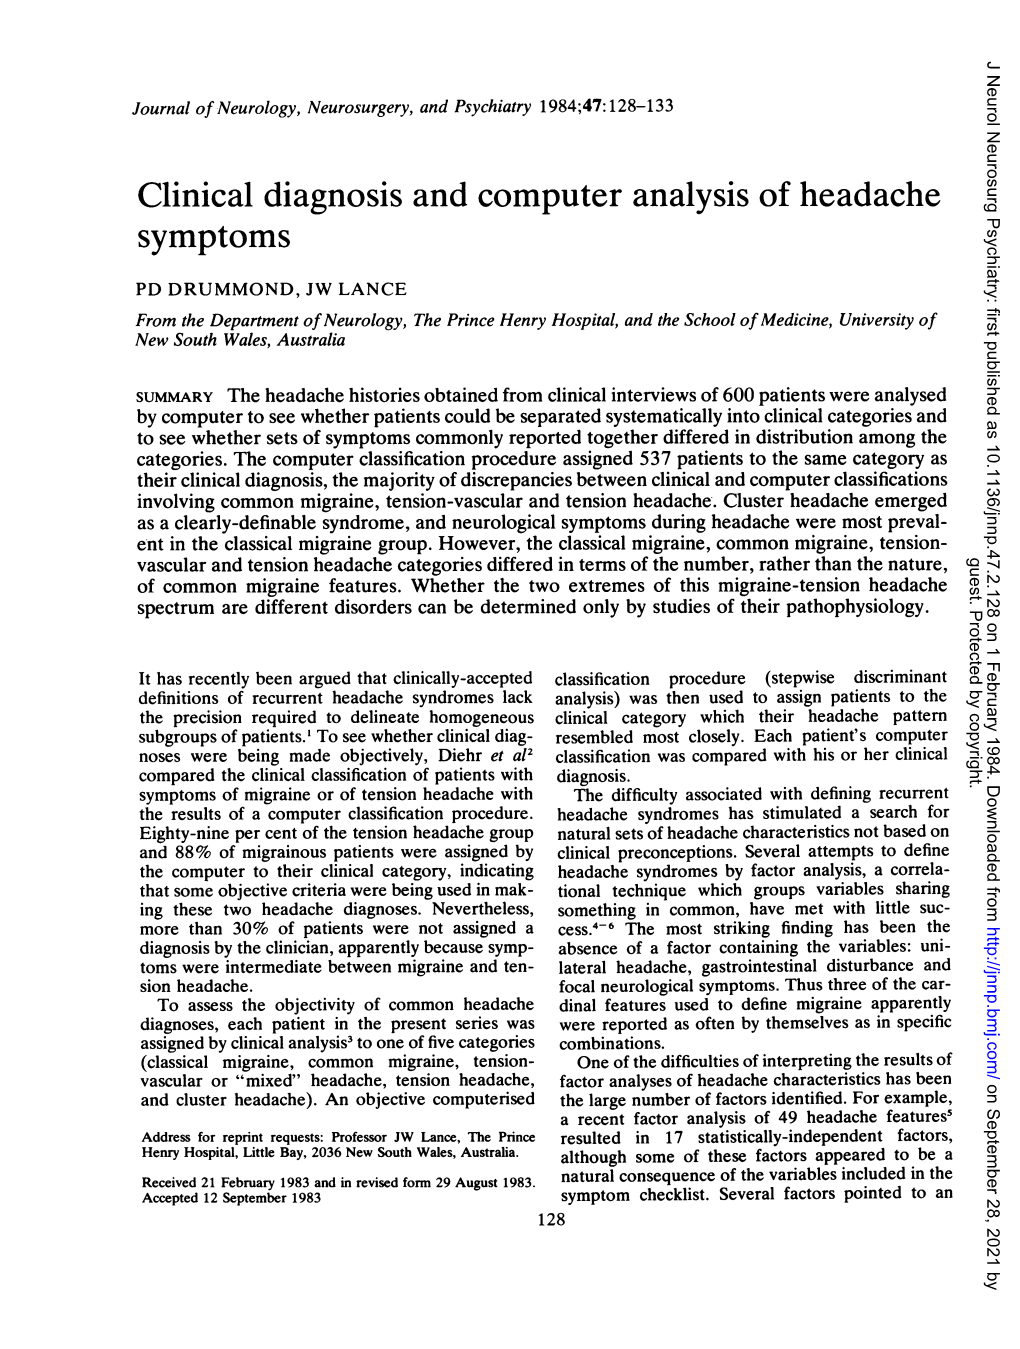 Clinical Diagnosis and Computer Analysis of Headache Symptoms